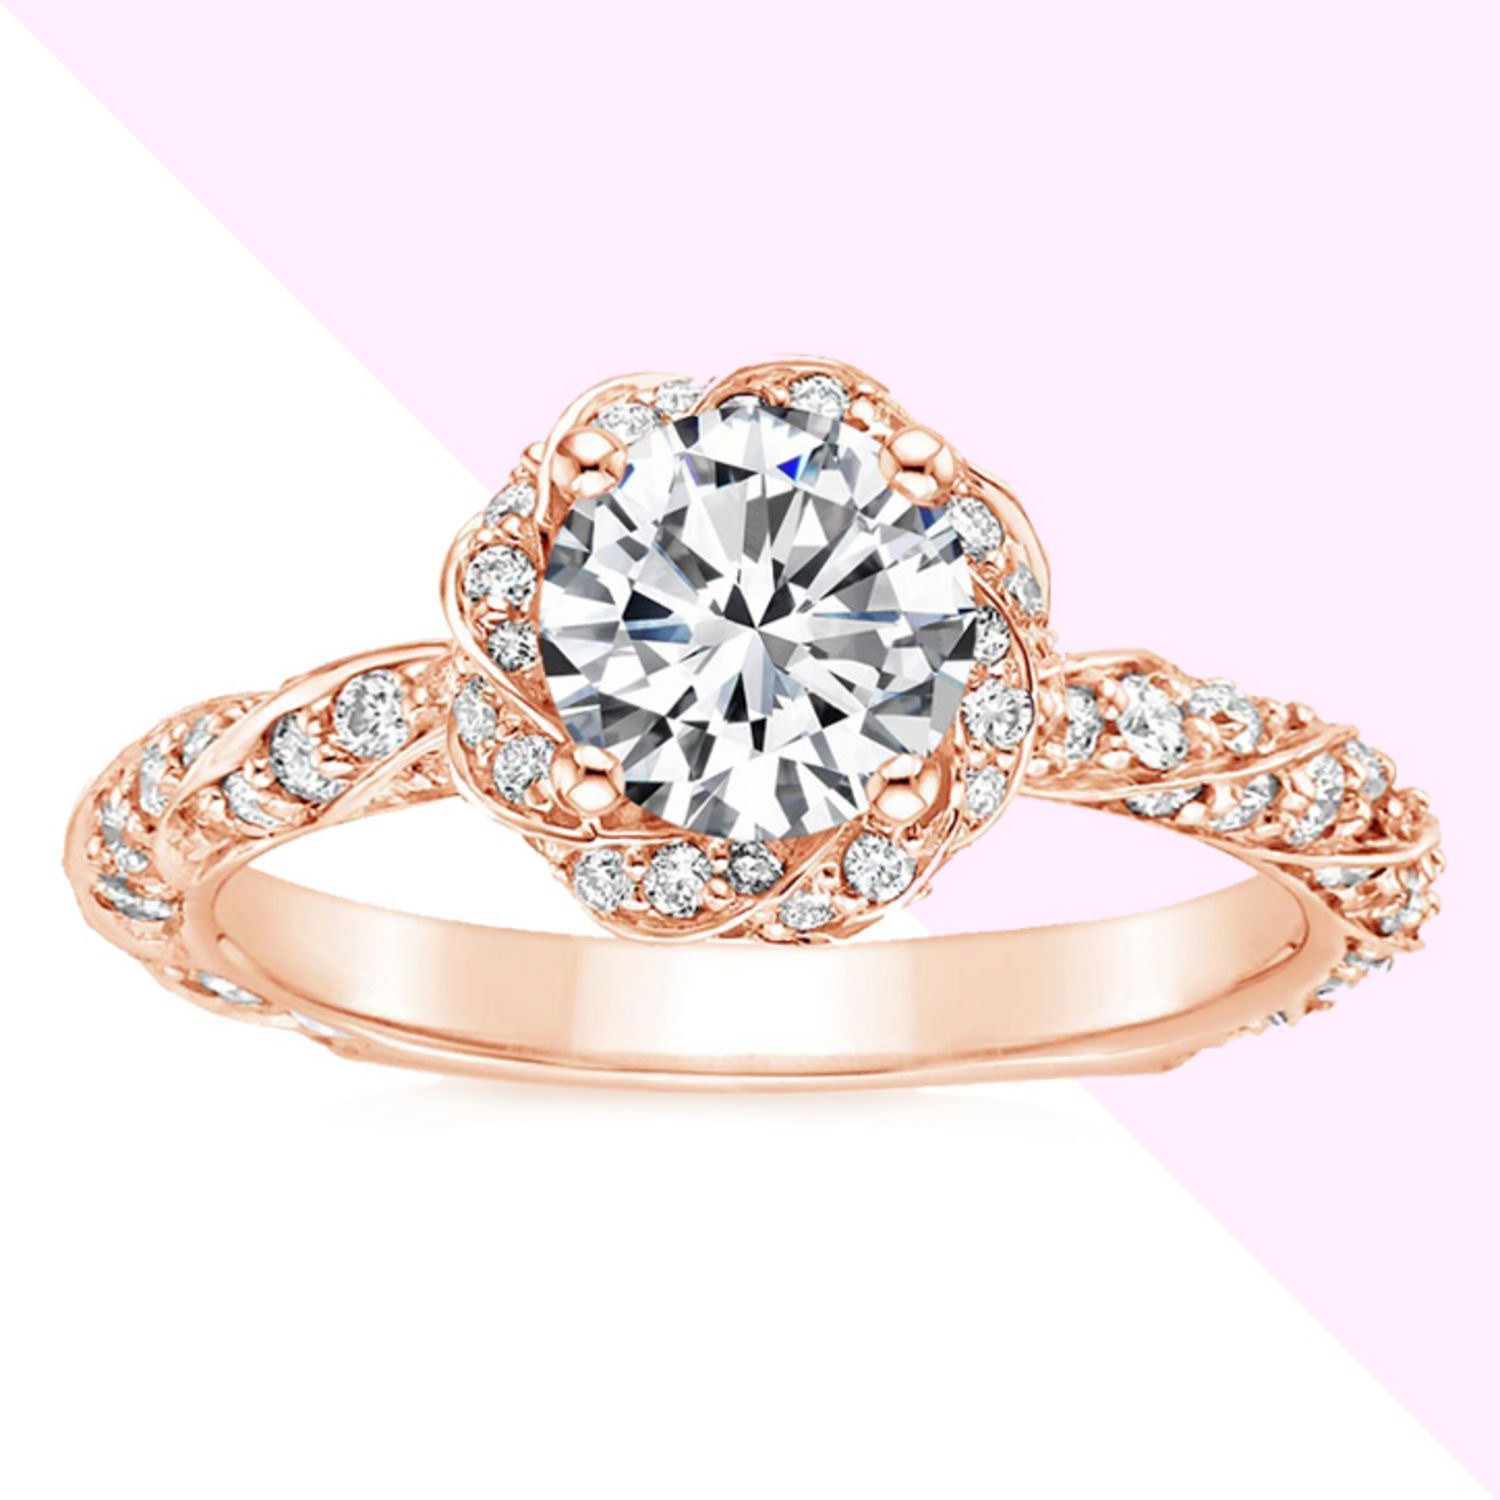 Best Wedding Ring Brands
 View Full Gallery of Beautiful Best Wedding Ring Brands